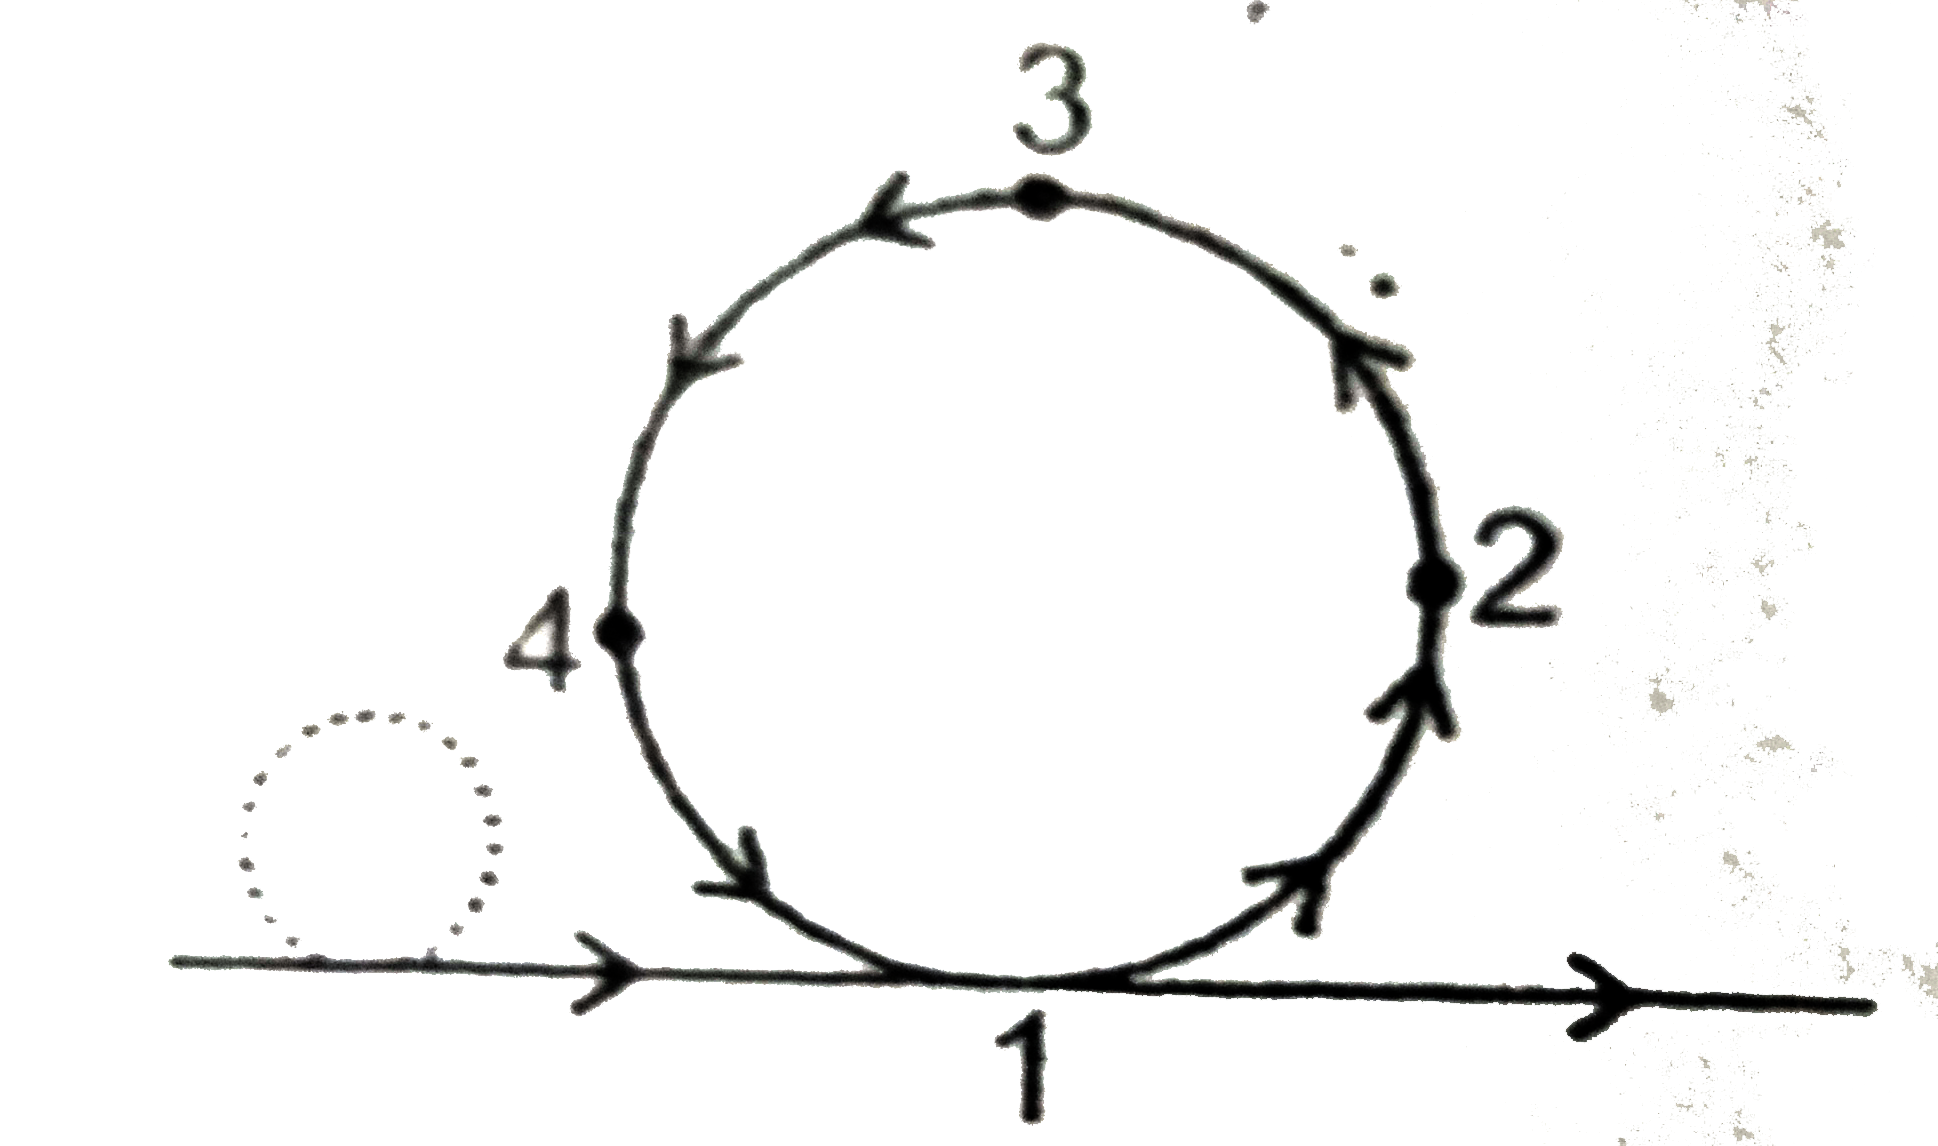 A rectangular block is mobing along a frictionless path, when it encounters the circular loop as shown. The block passes points 1,2,3,4, before ret runing to the horizontal tracks. At point 3